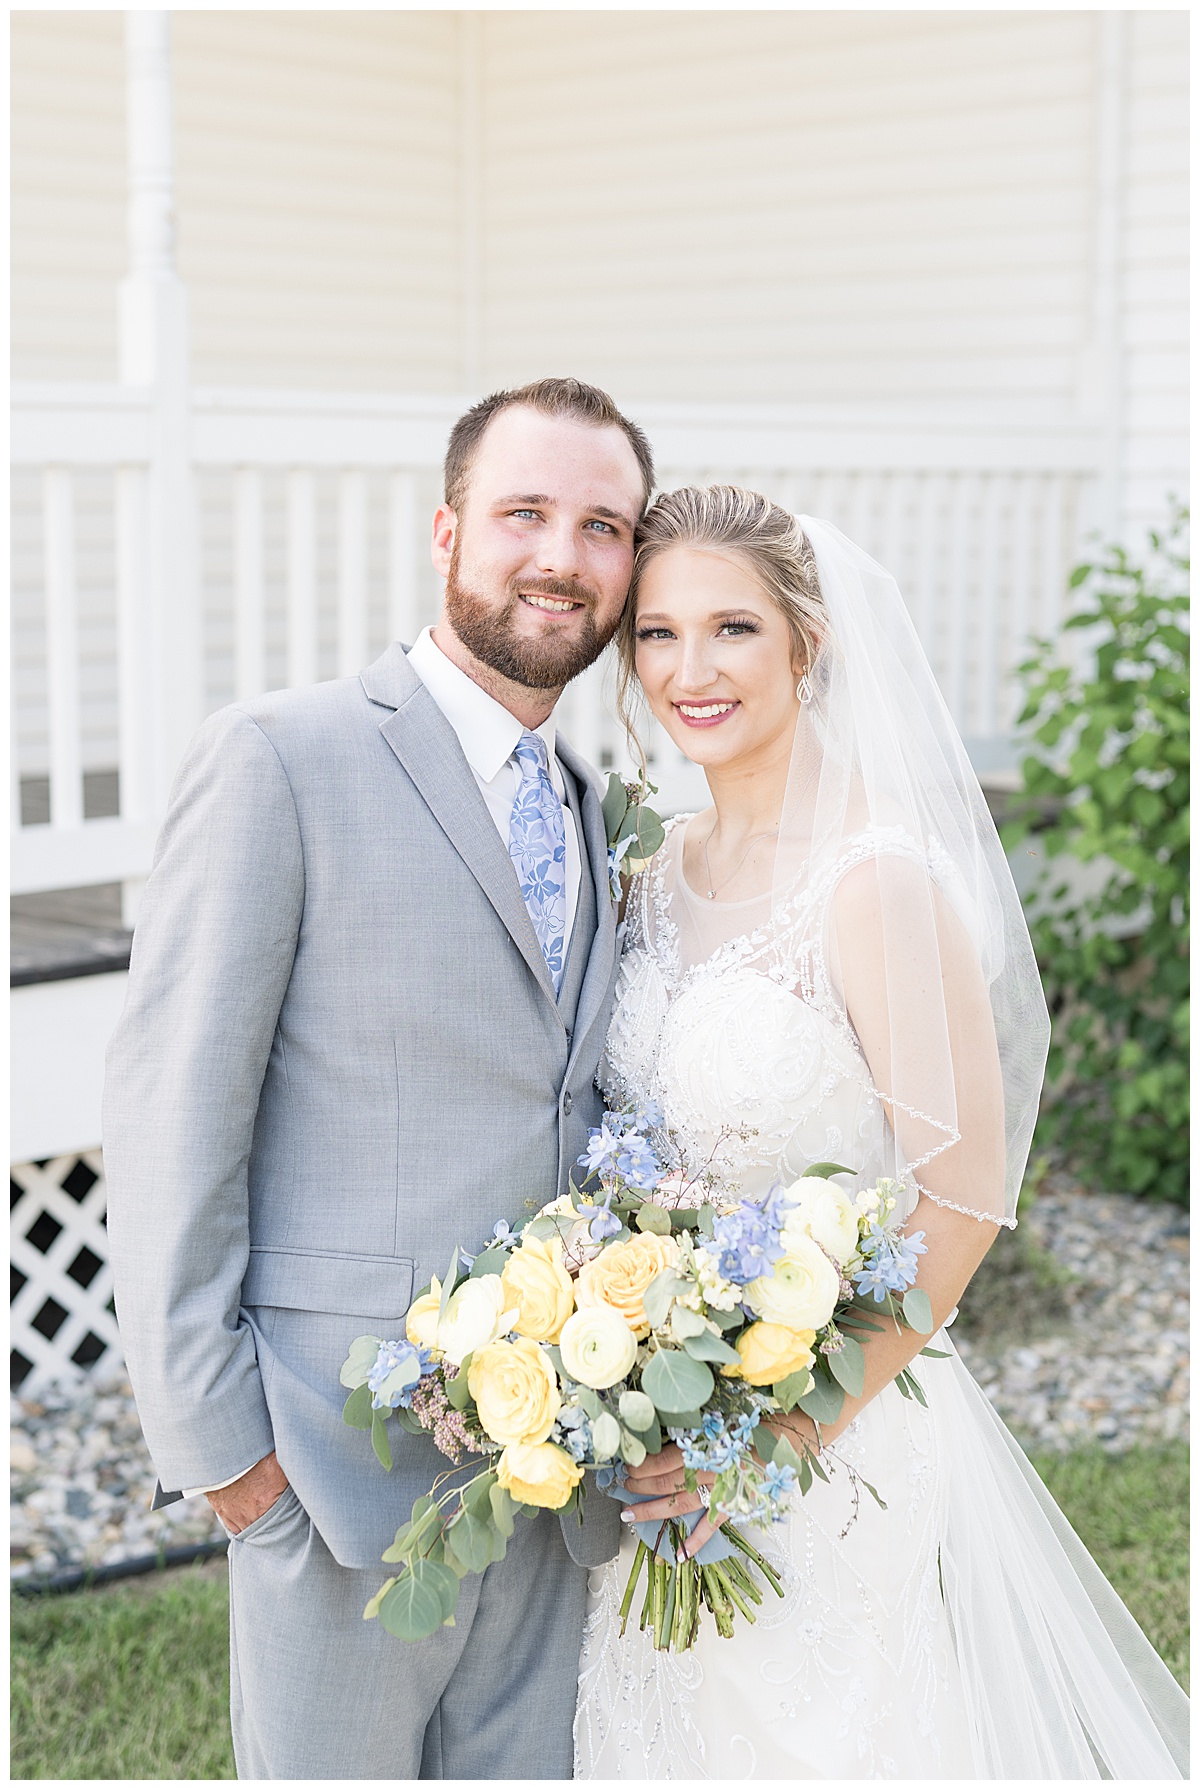 Just married photos at Gathering Acres wedding in Lafayette, Indiana